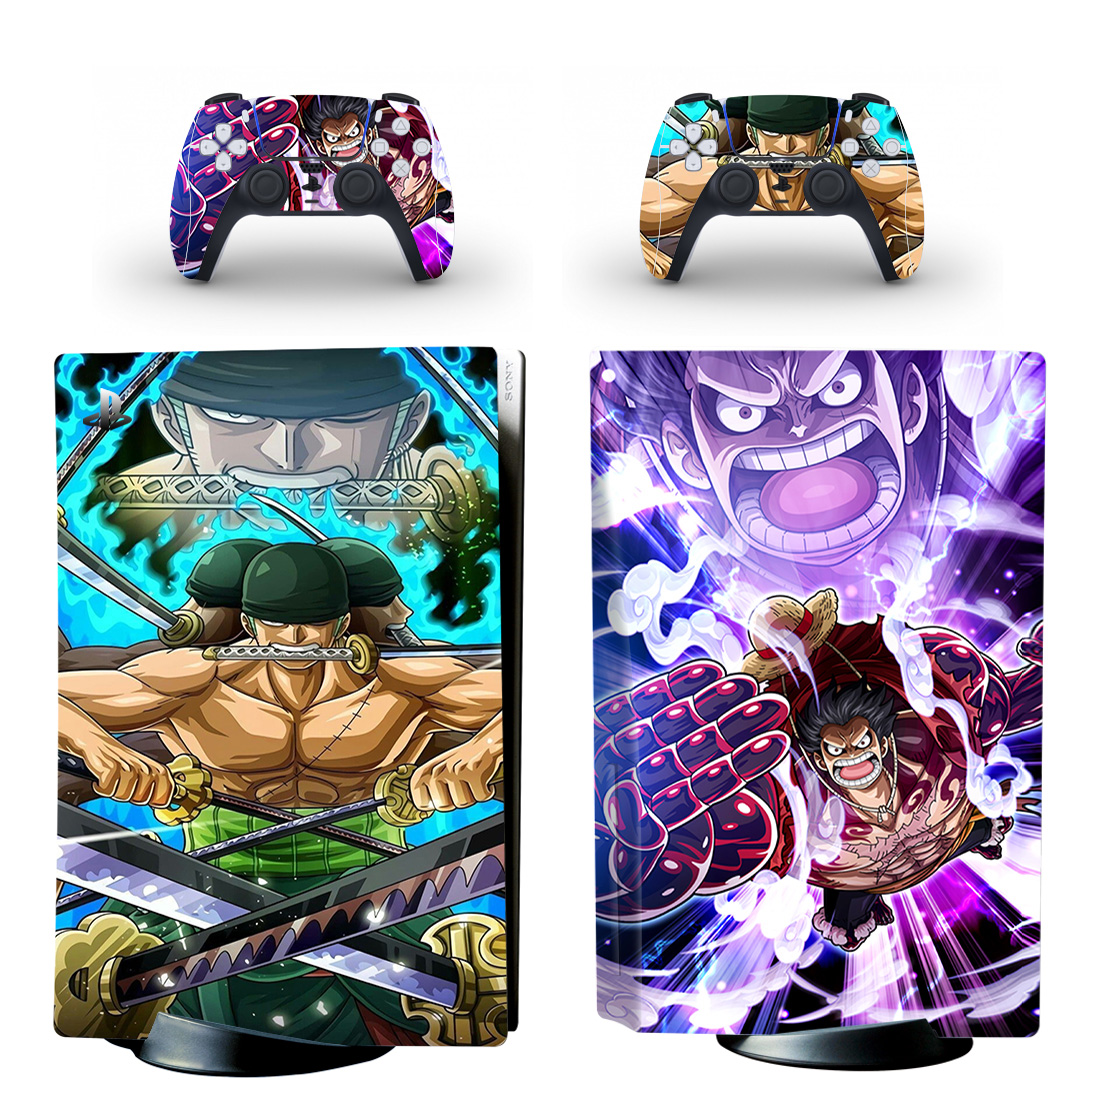 One Piece Roronoa zoro Vs Luffy Gear4 Boundman Skin Sticker For PS5 Skin And Controllers